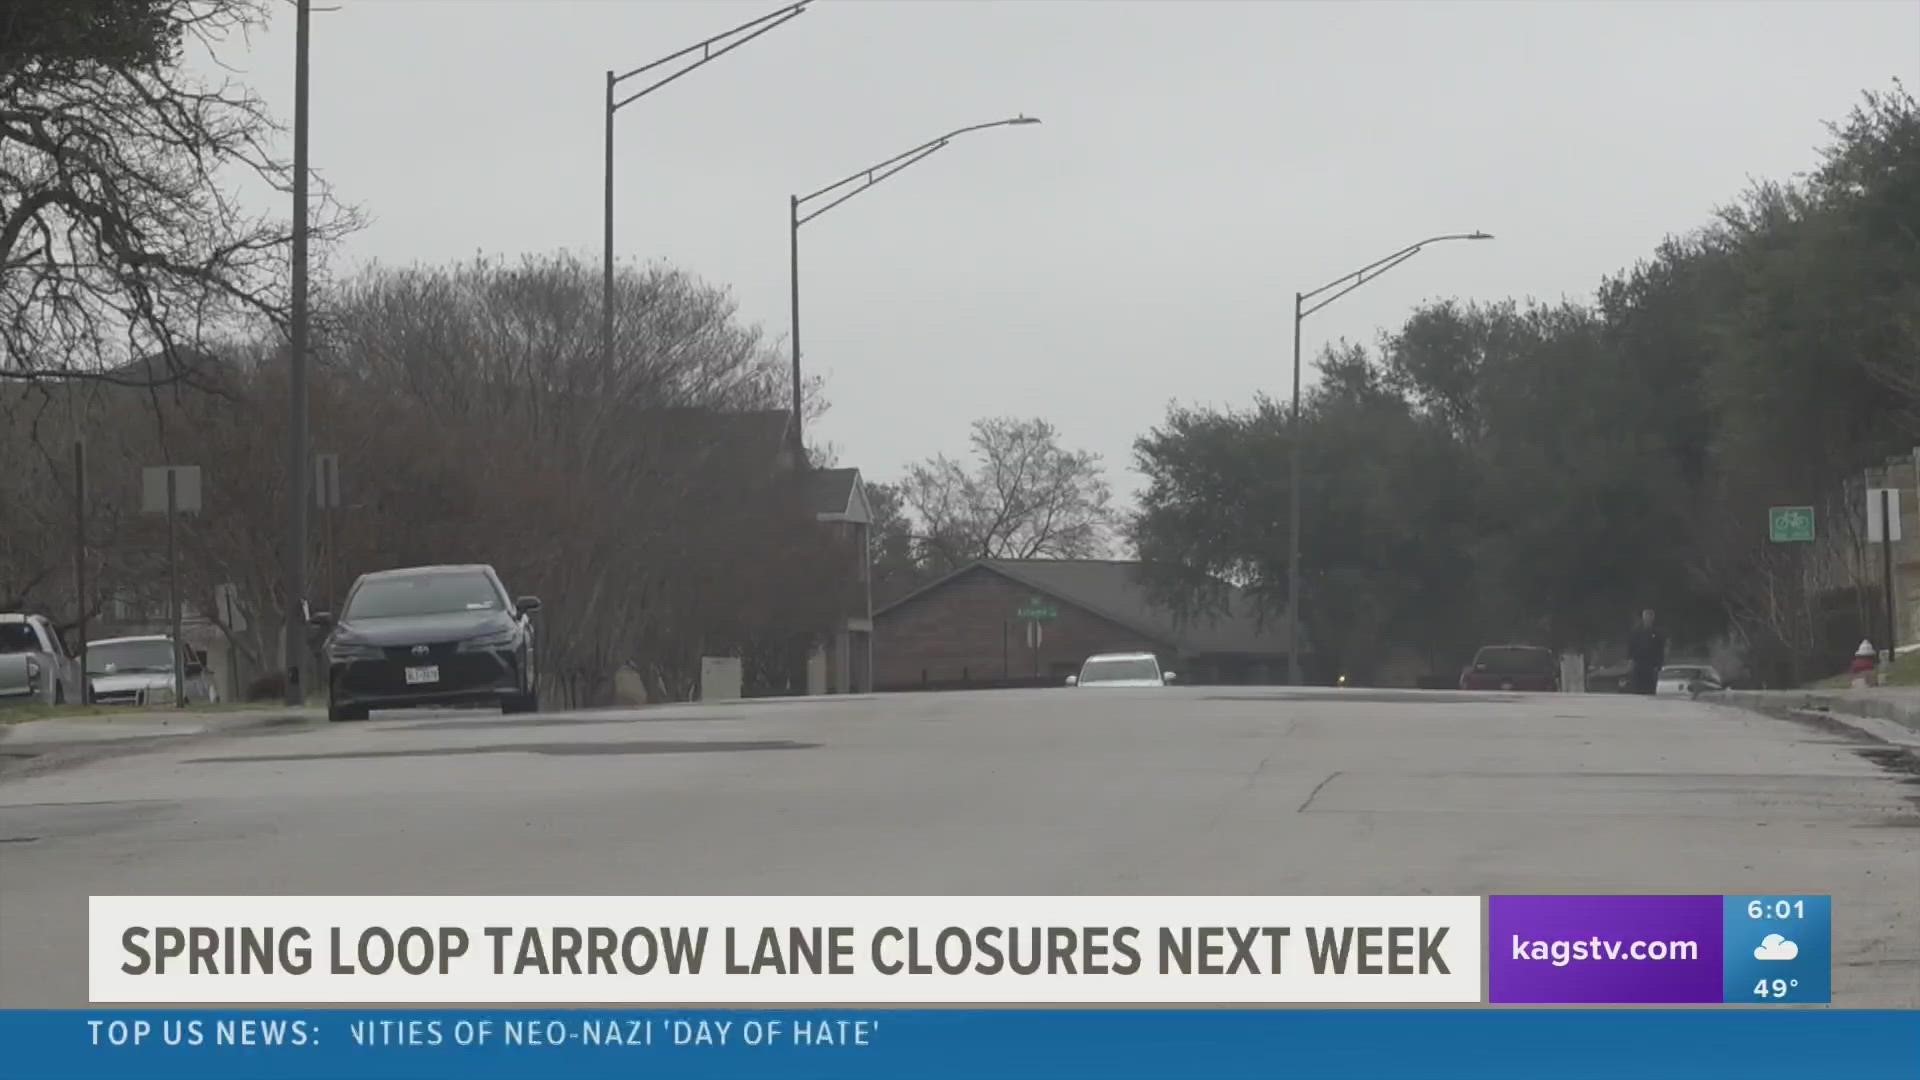 Be aware of these closures if you're in the areas of Spring Loop or Tarrow Street in the coming weeks.